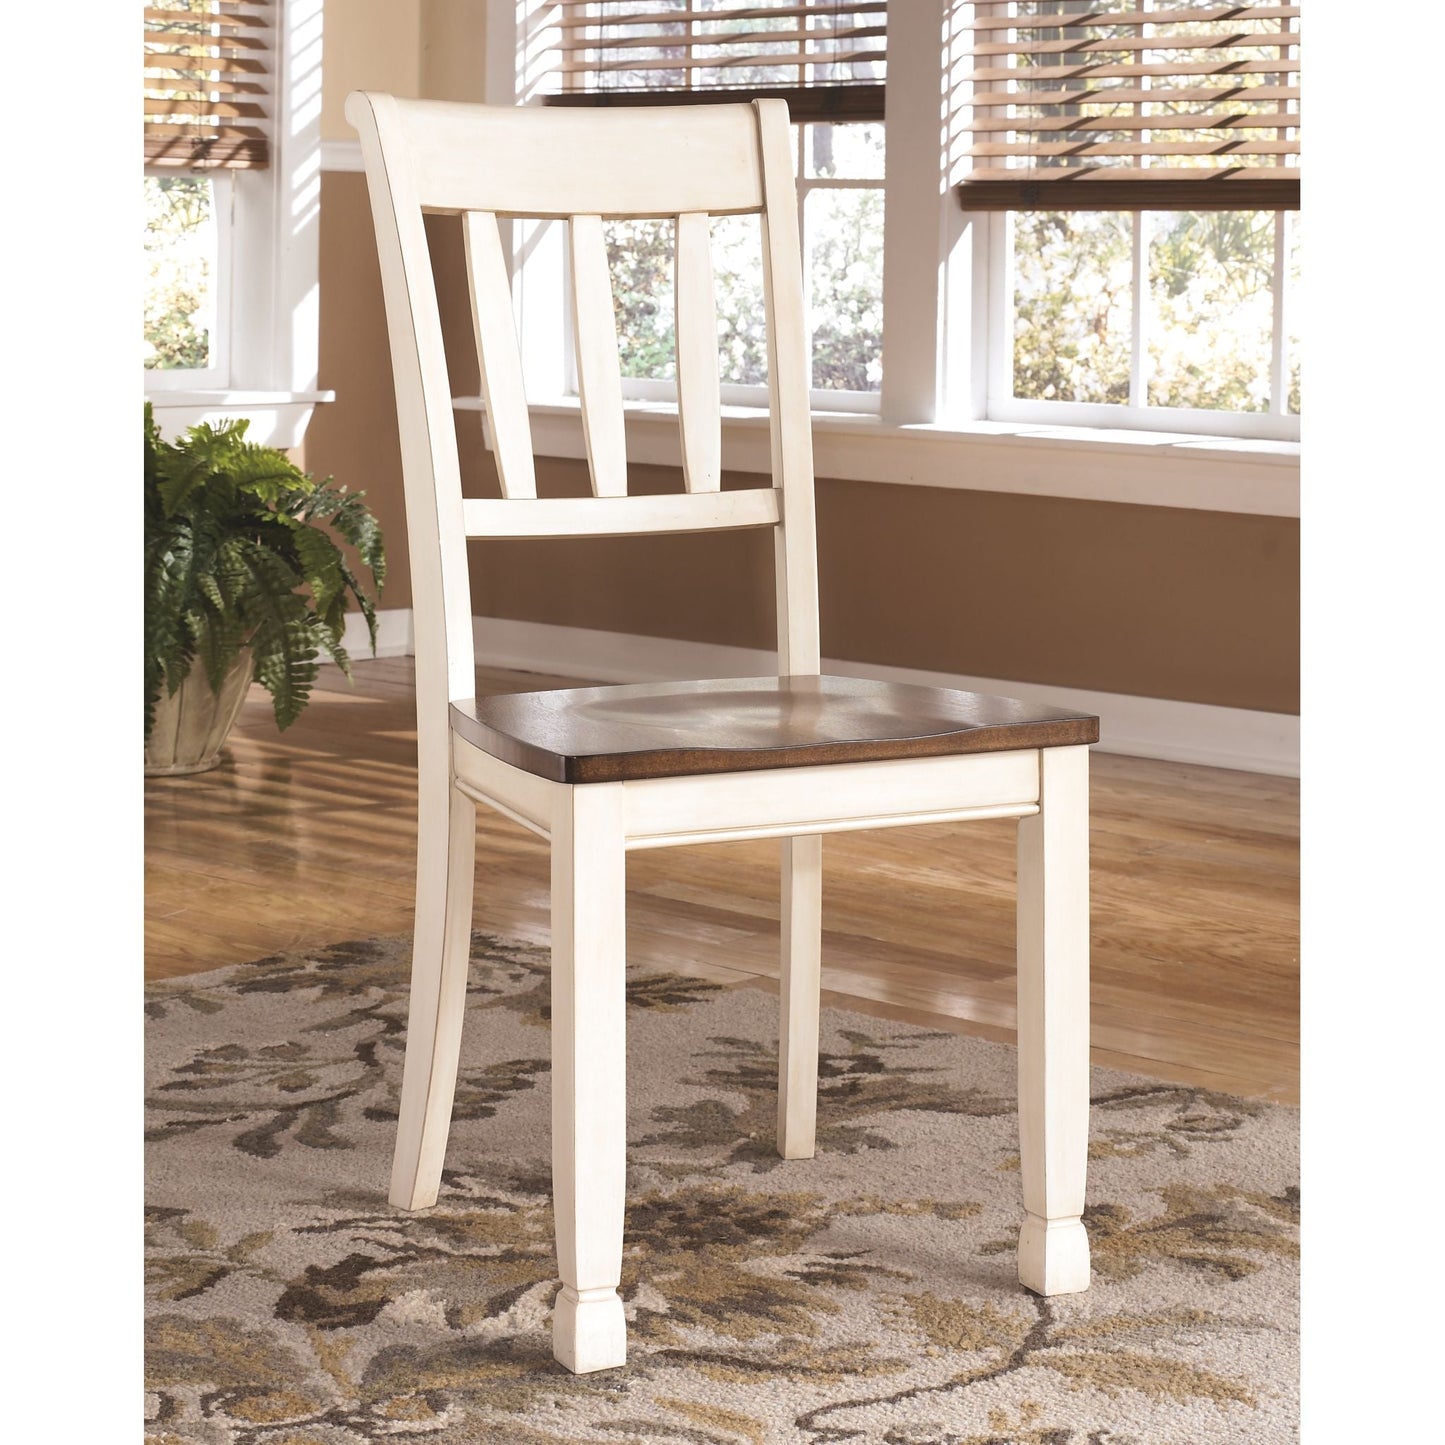 Whitesburg 8 Piece Casual Dining - Brown/Cottage White - (PKG002056)